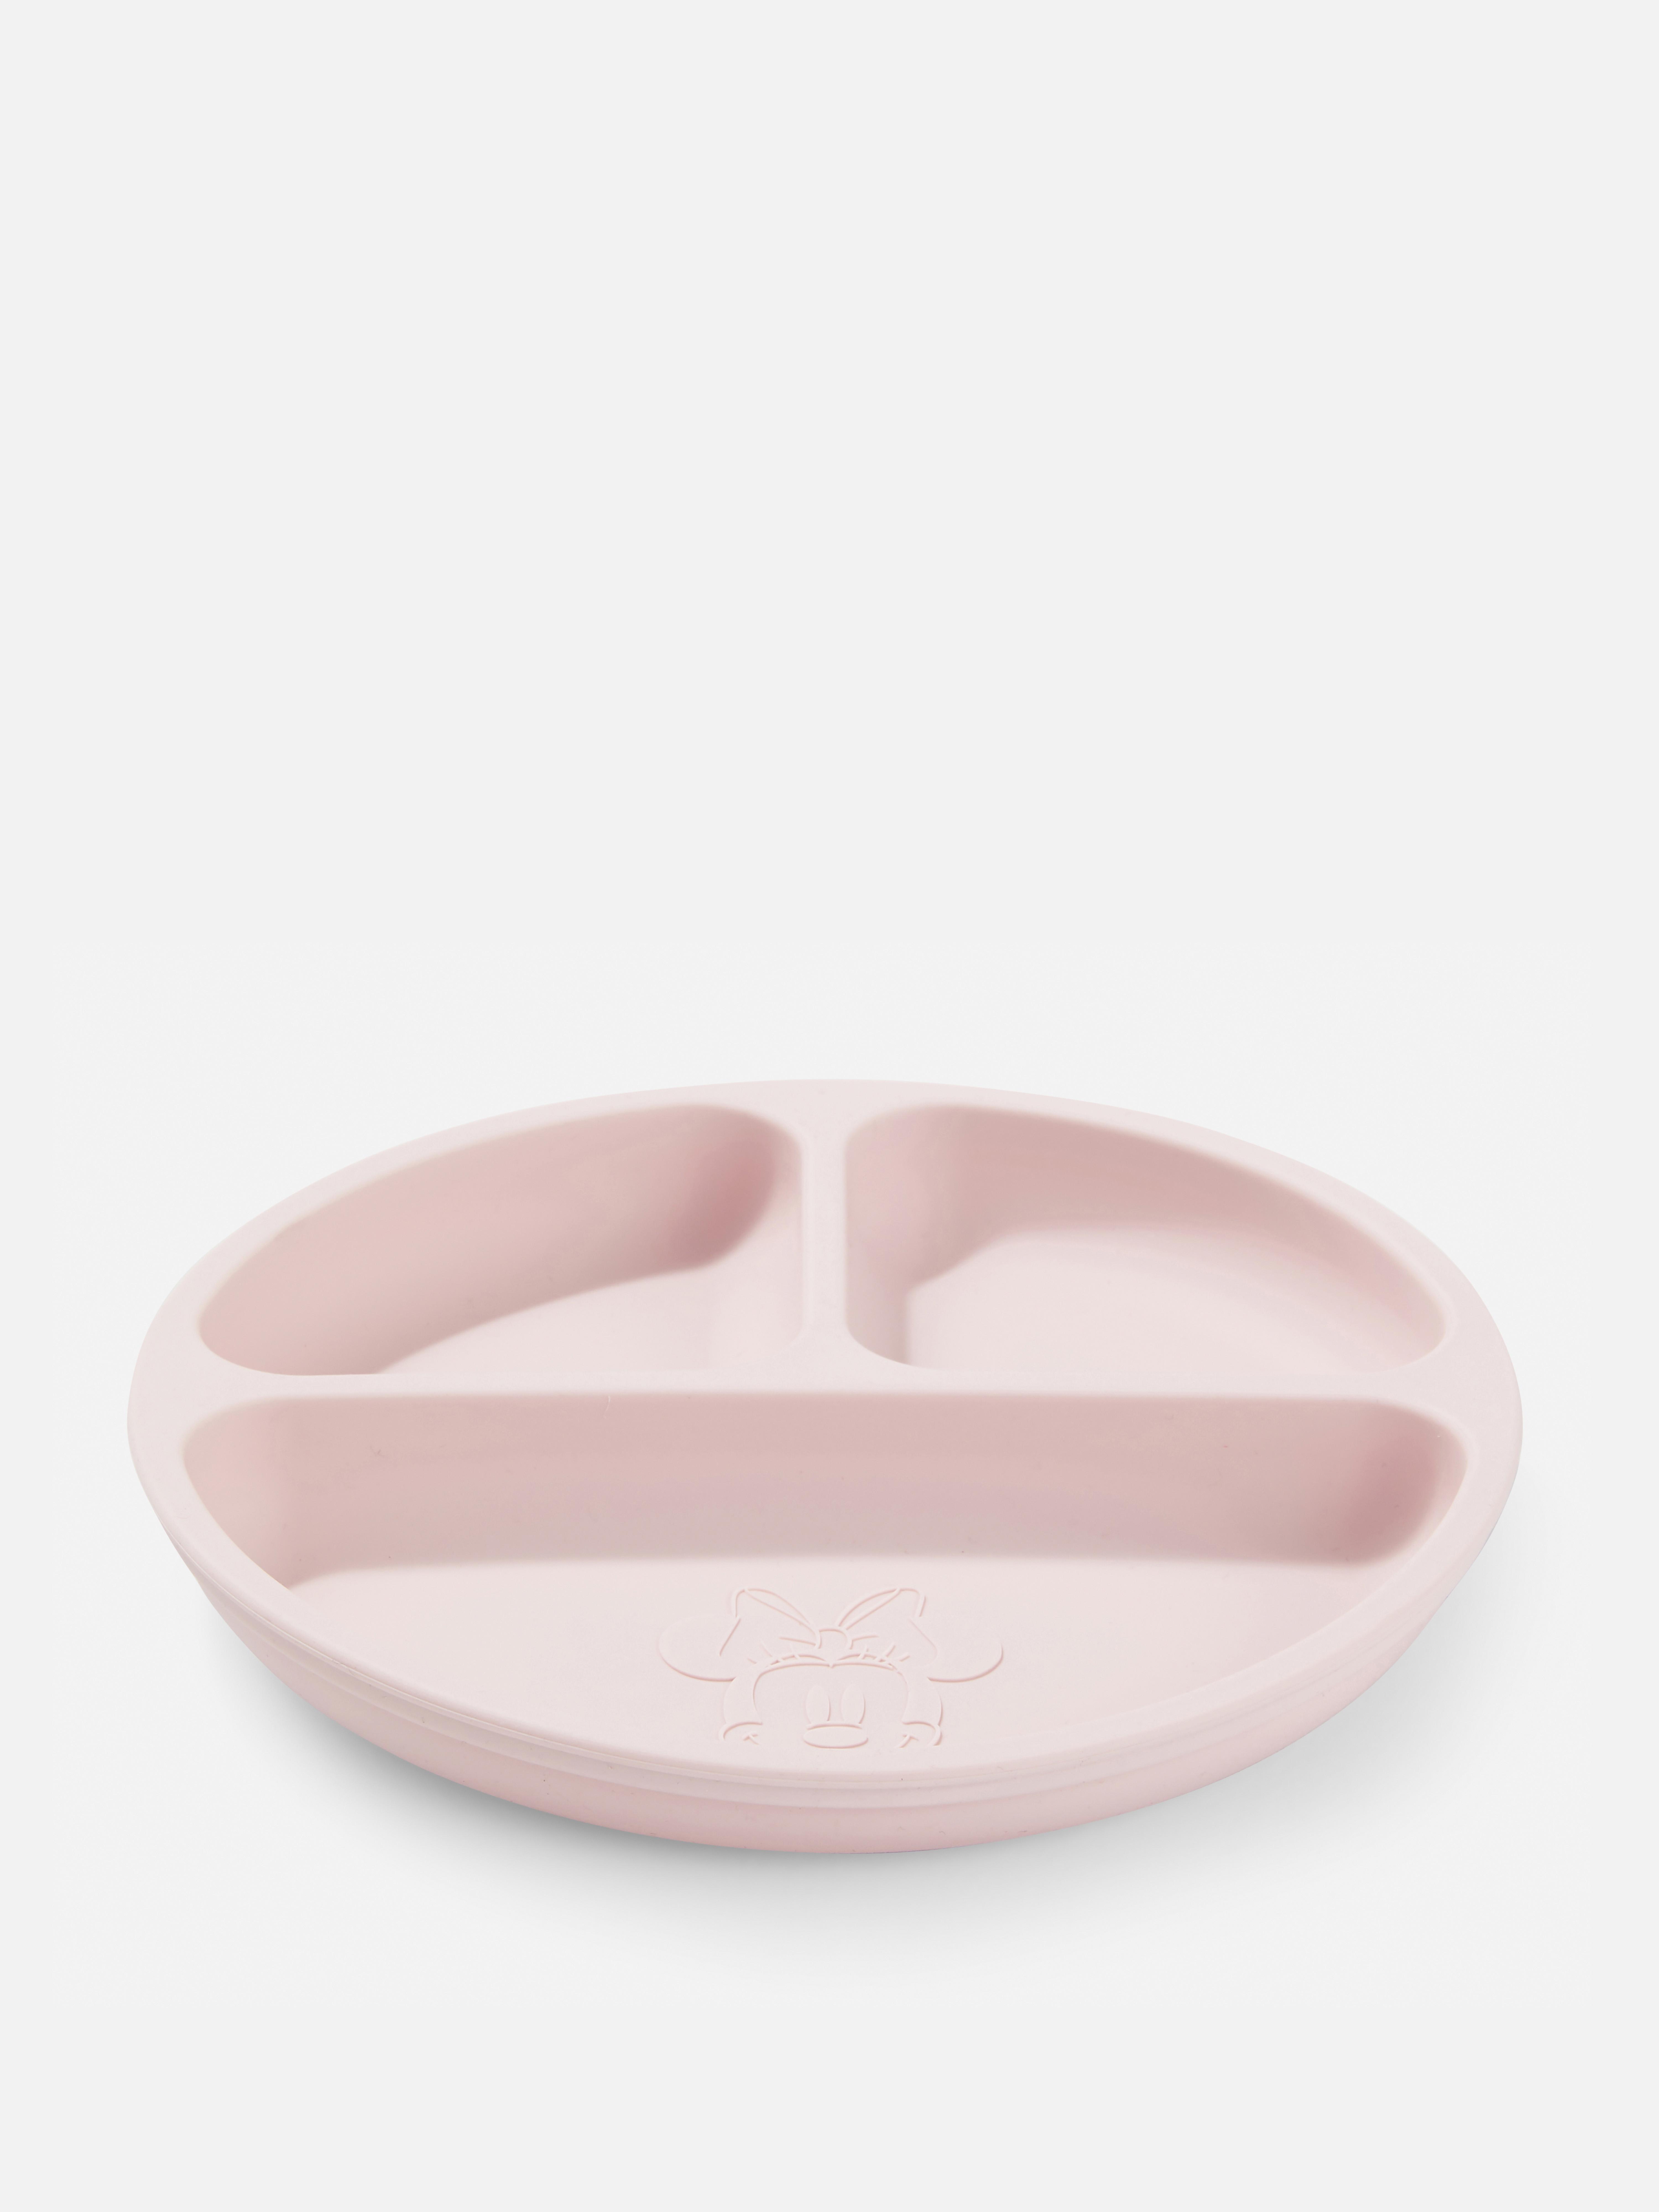 Disney's Minnie Mouse Silicone Section Plate